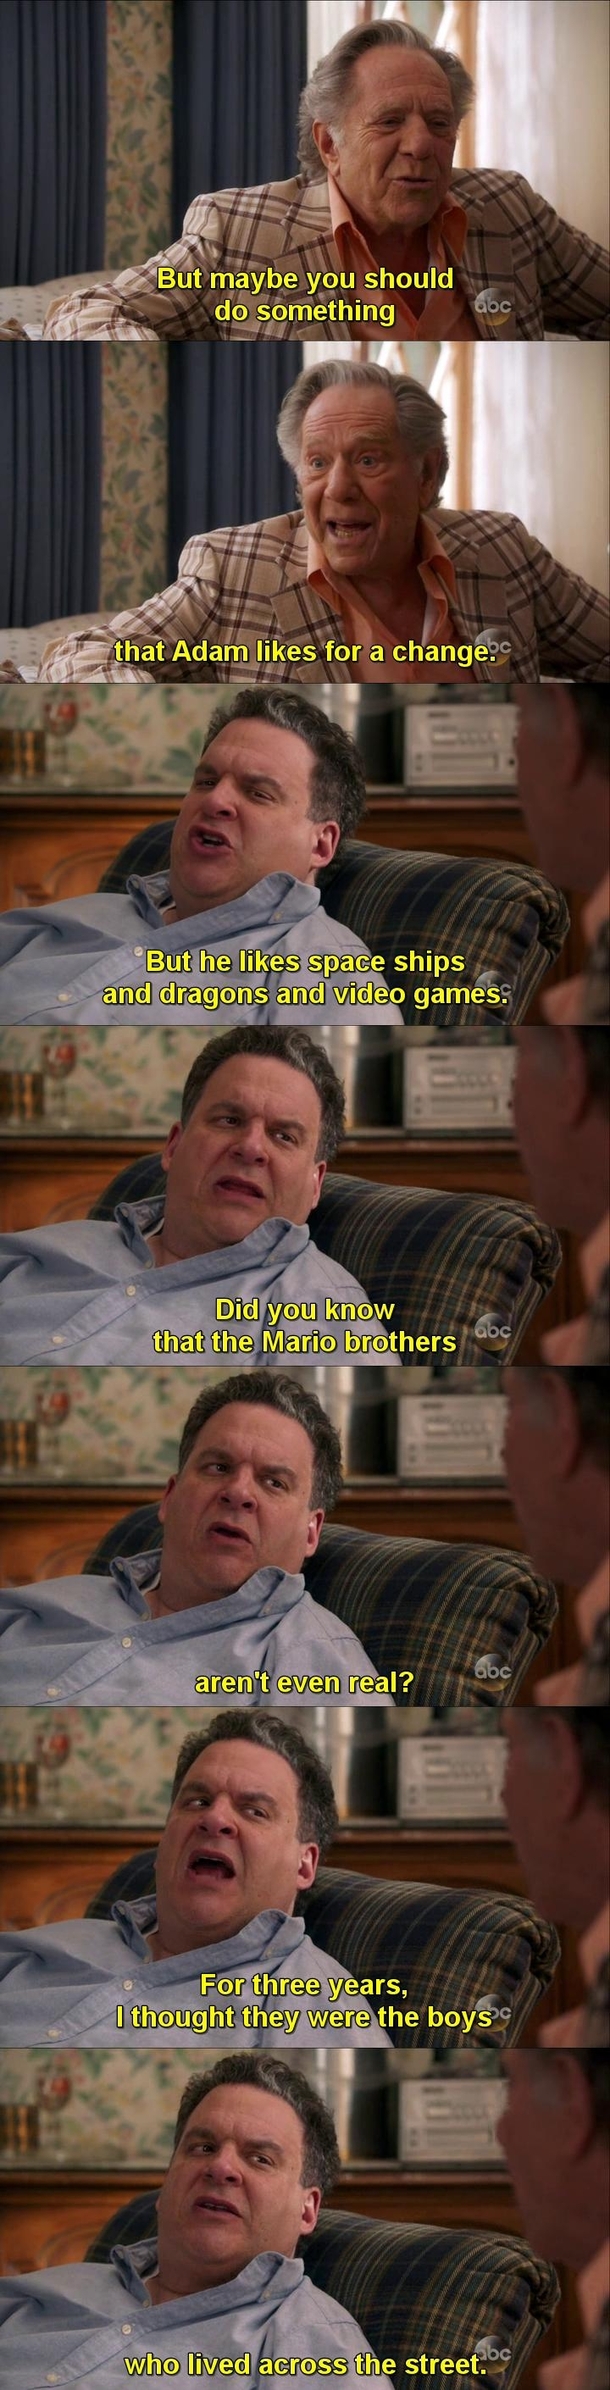 Mario Brothers x-post from rTelevisionQuotes